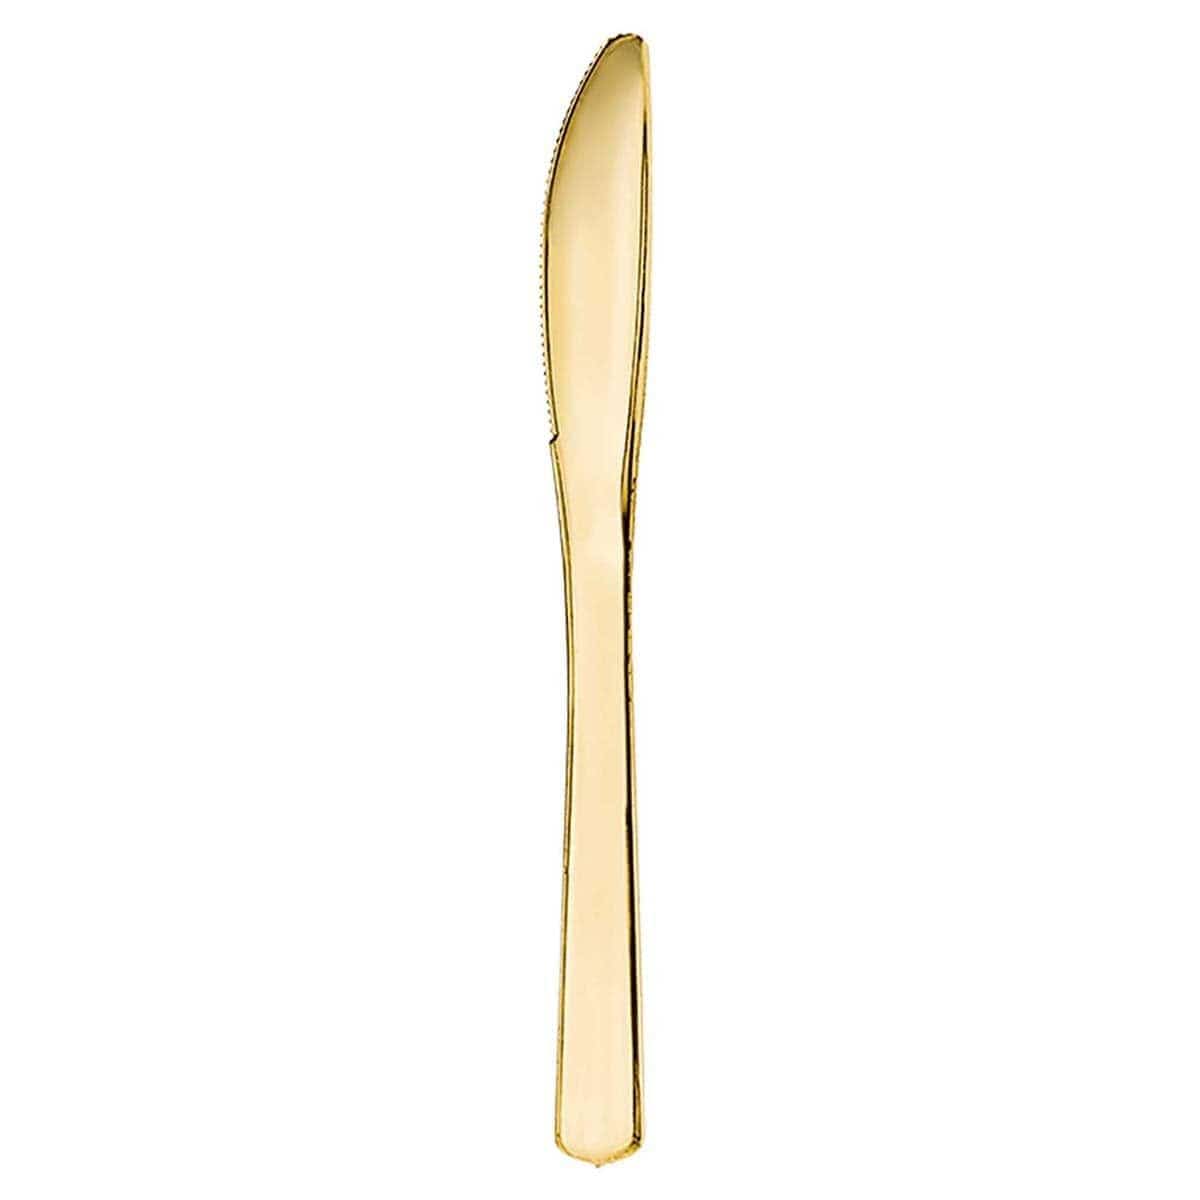 Buy Plasticware Premium Knives - Gold 32/pkg sold at Party Expert